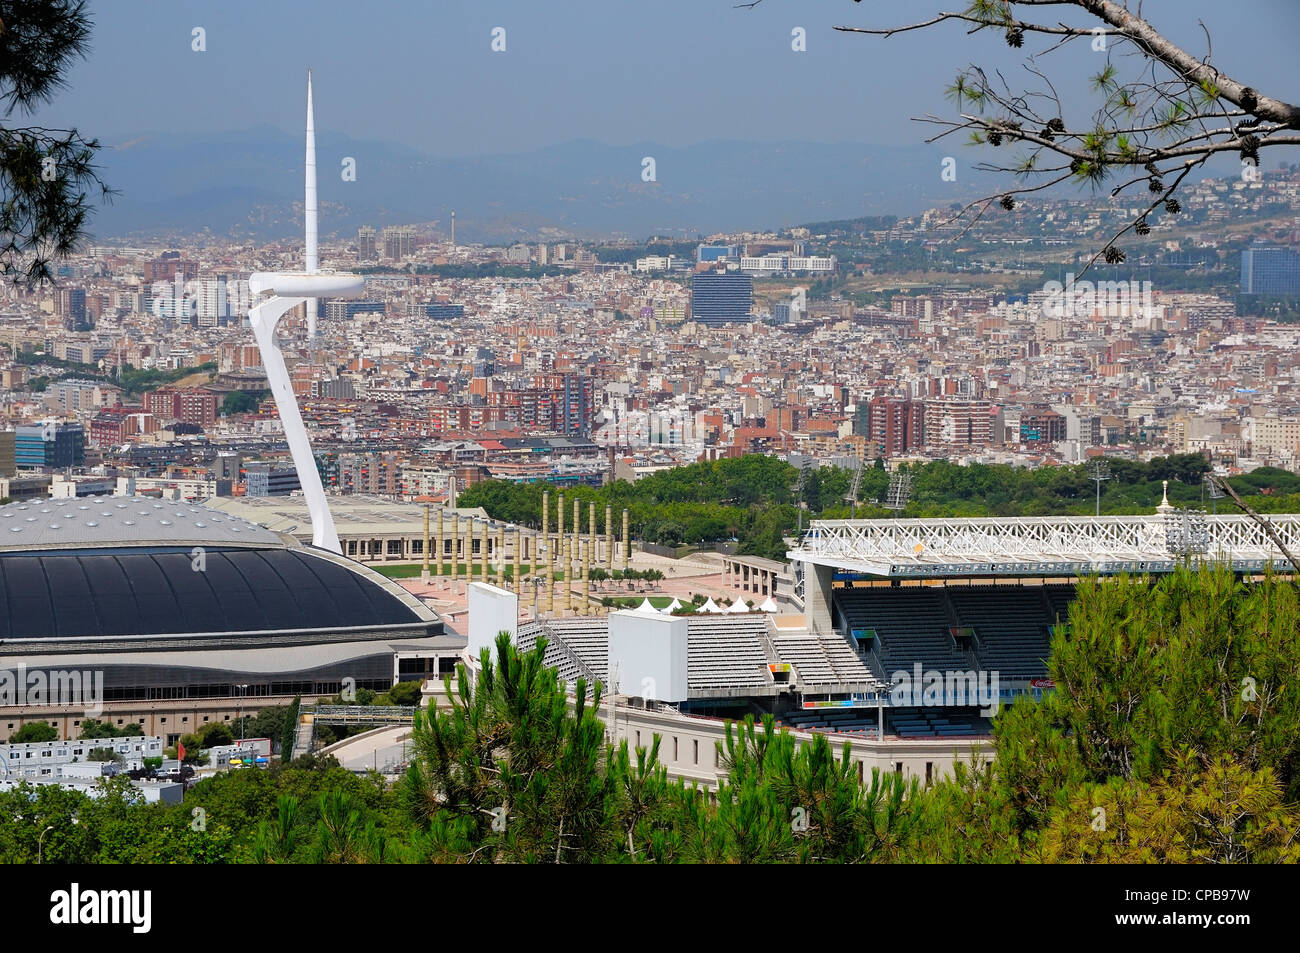 Palau Sant Jordi (St. George's sporting arena) and Montjuïc Communications Tower in the Olympic park in Barcelona, Spain. Stock Photo